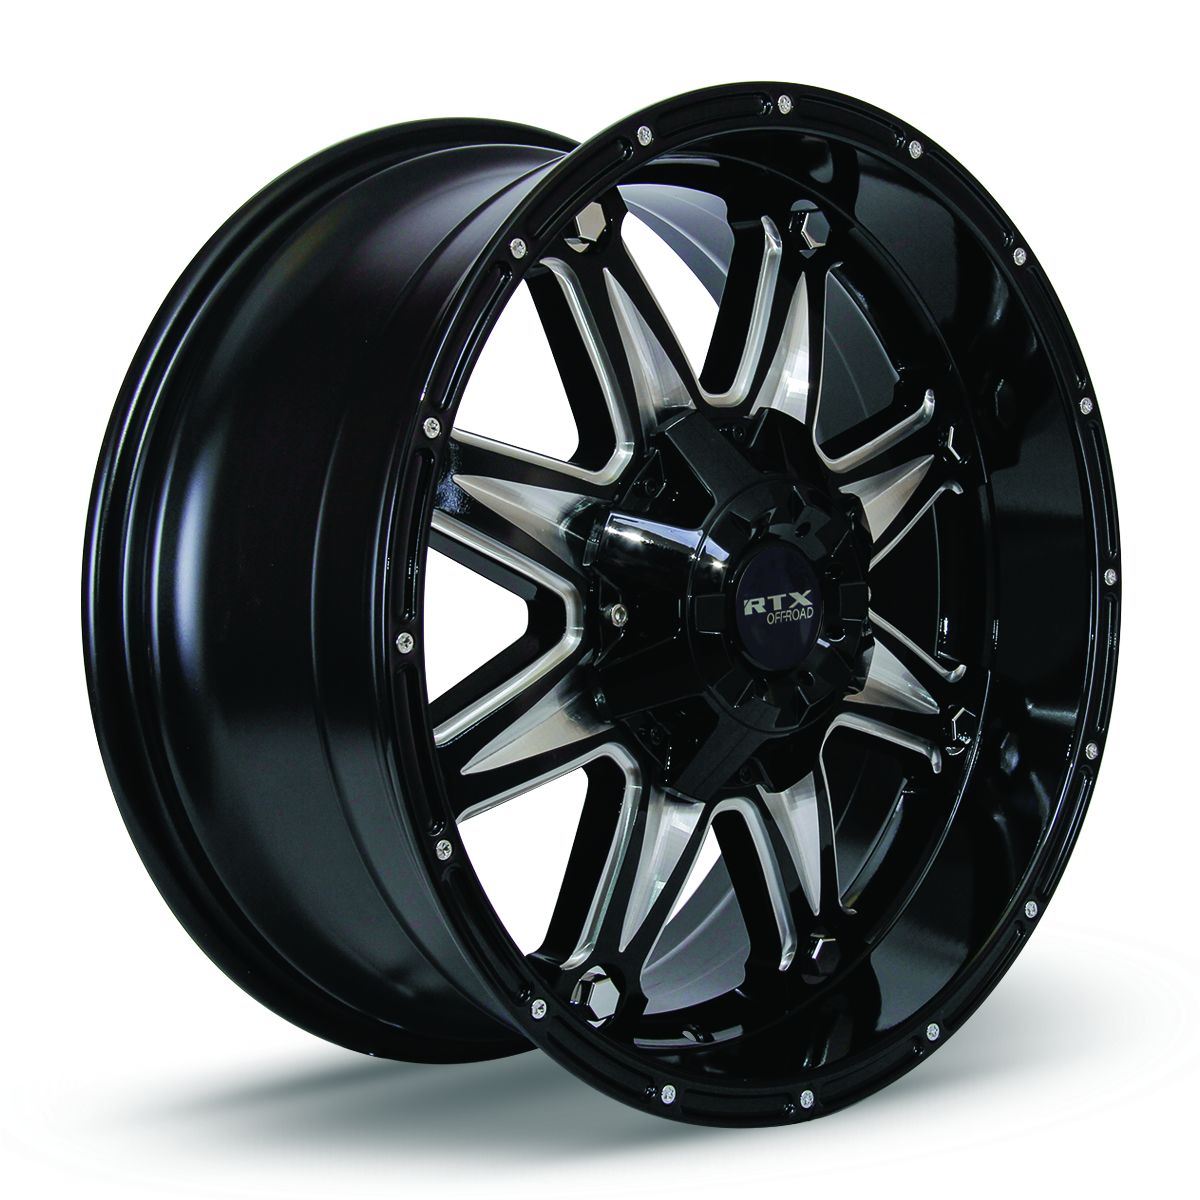 Spine • Black with Milled Spokes • 17x9 5x135/139.7 ET0 CB87.1